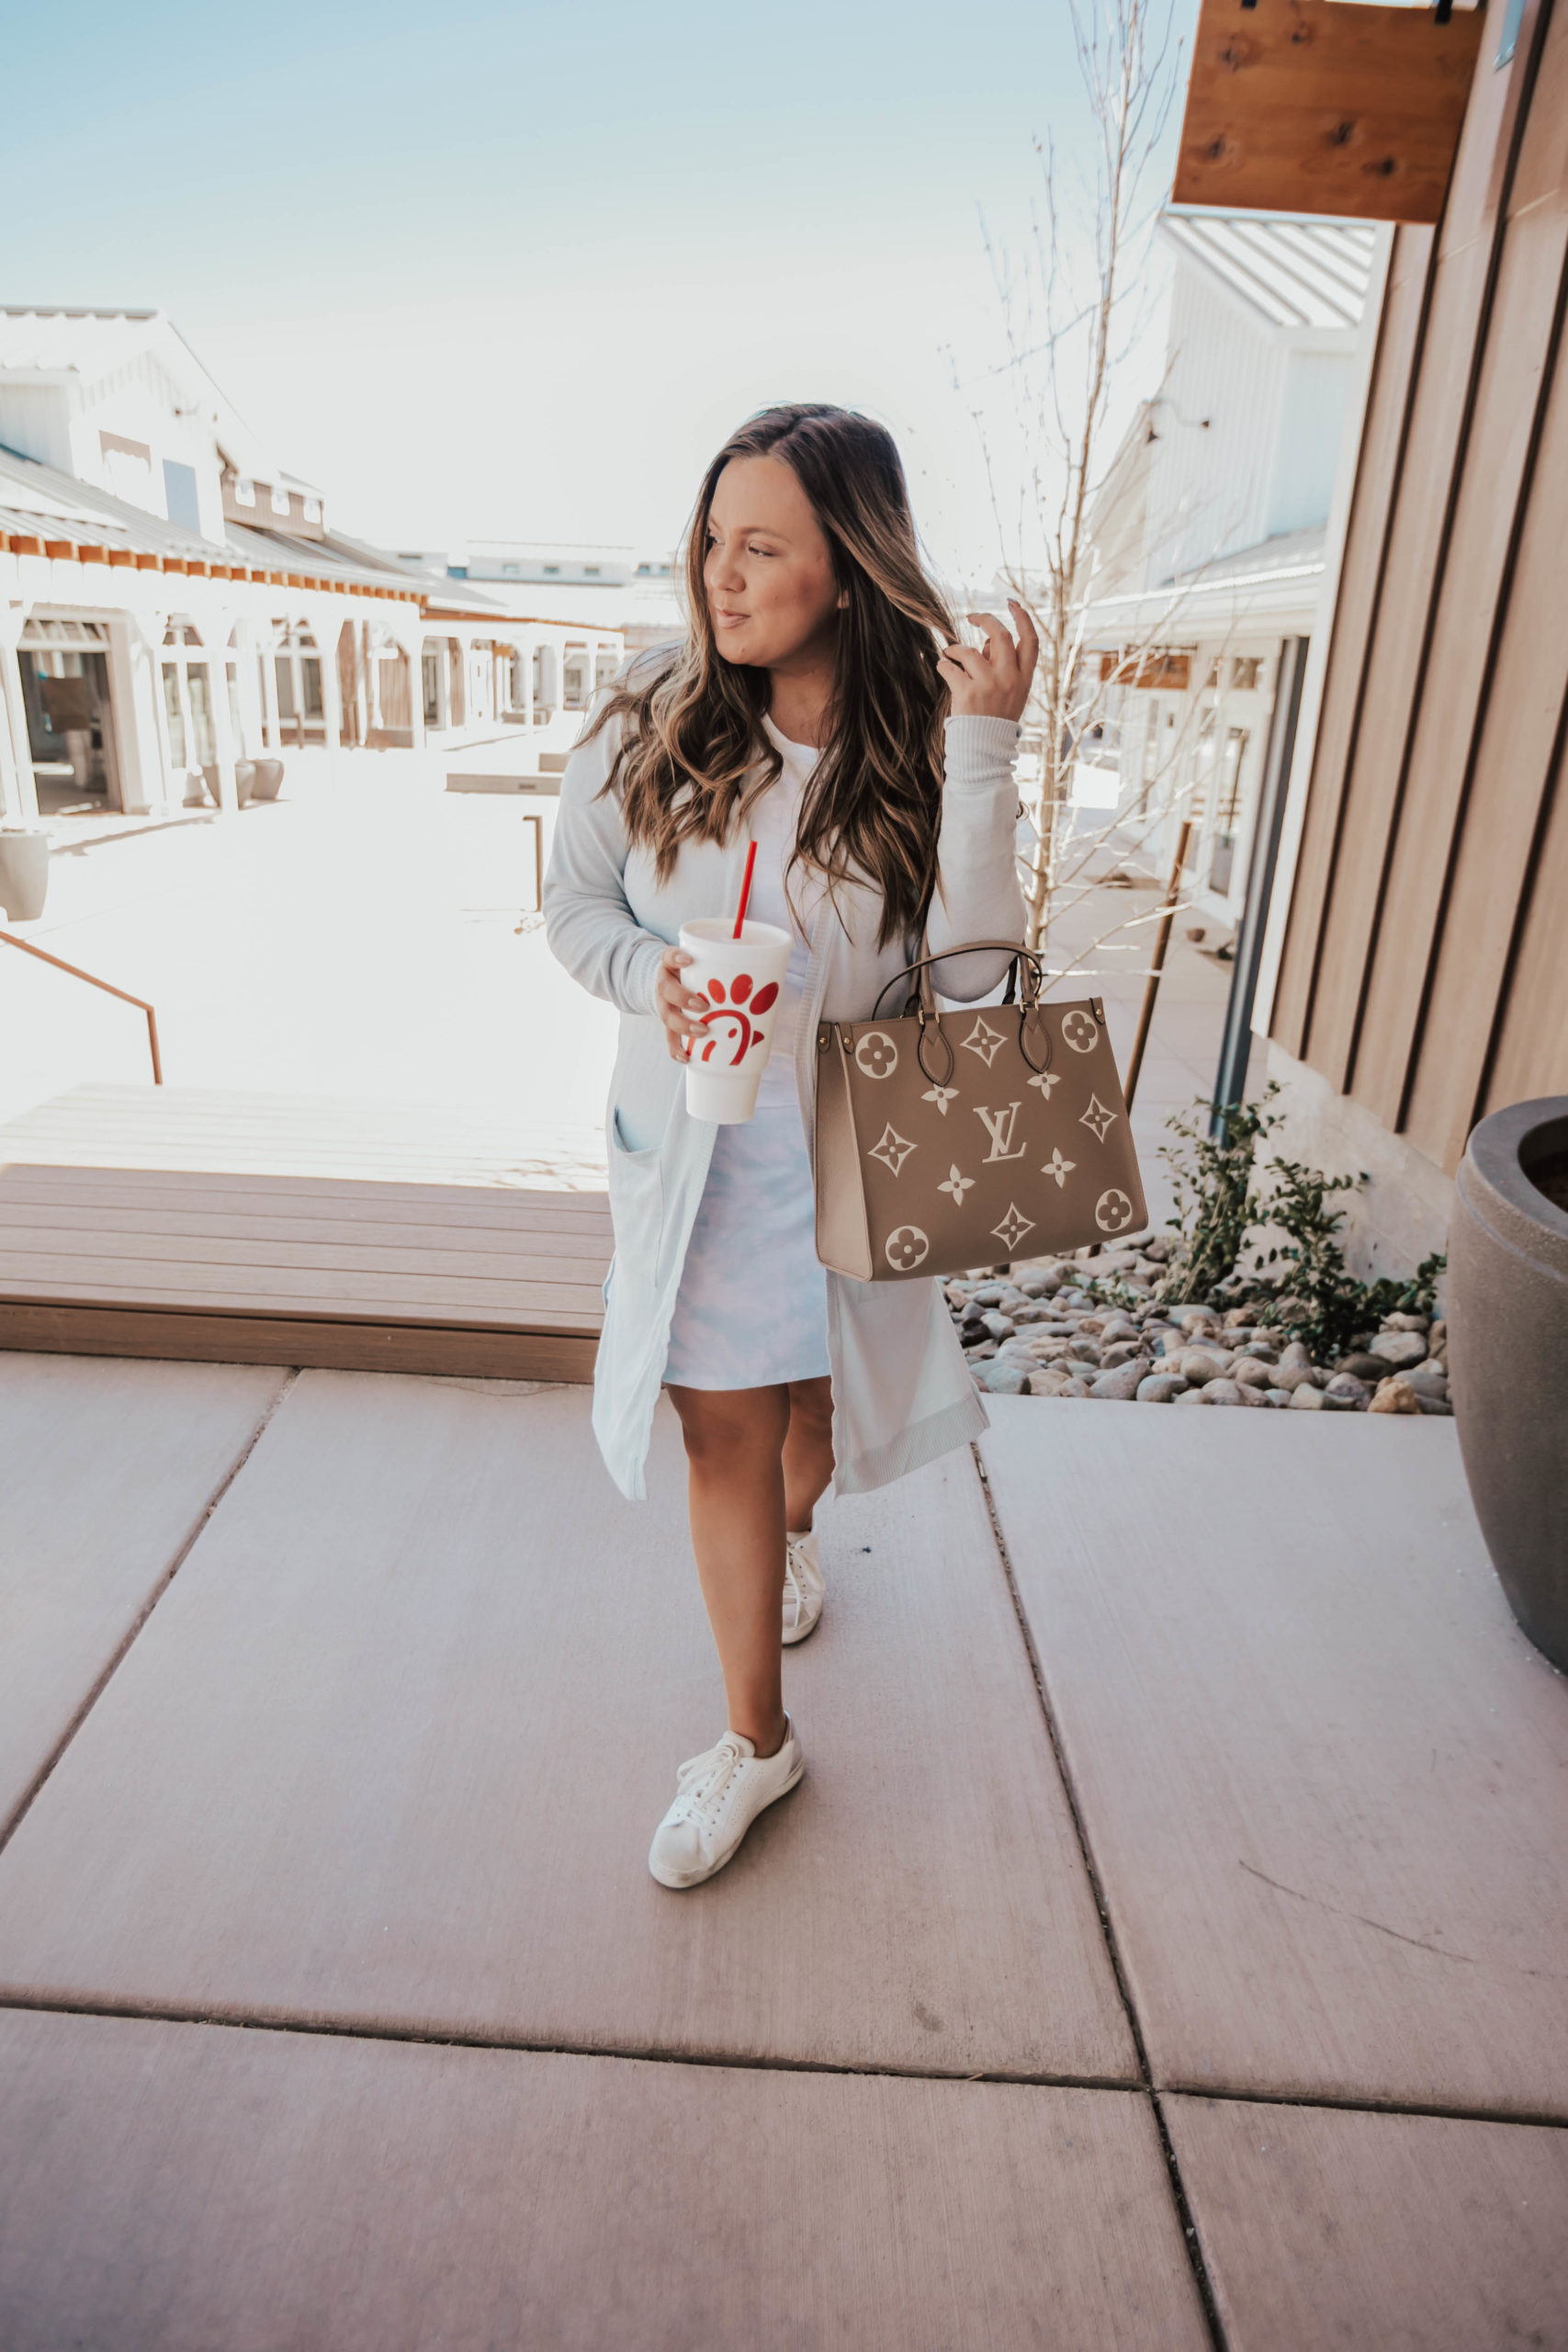 Reno blogger, Ashley Zeal Hurd, from The Ashley and Emily Blog shares her picks for the best baby blue items to have this spring!